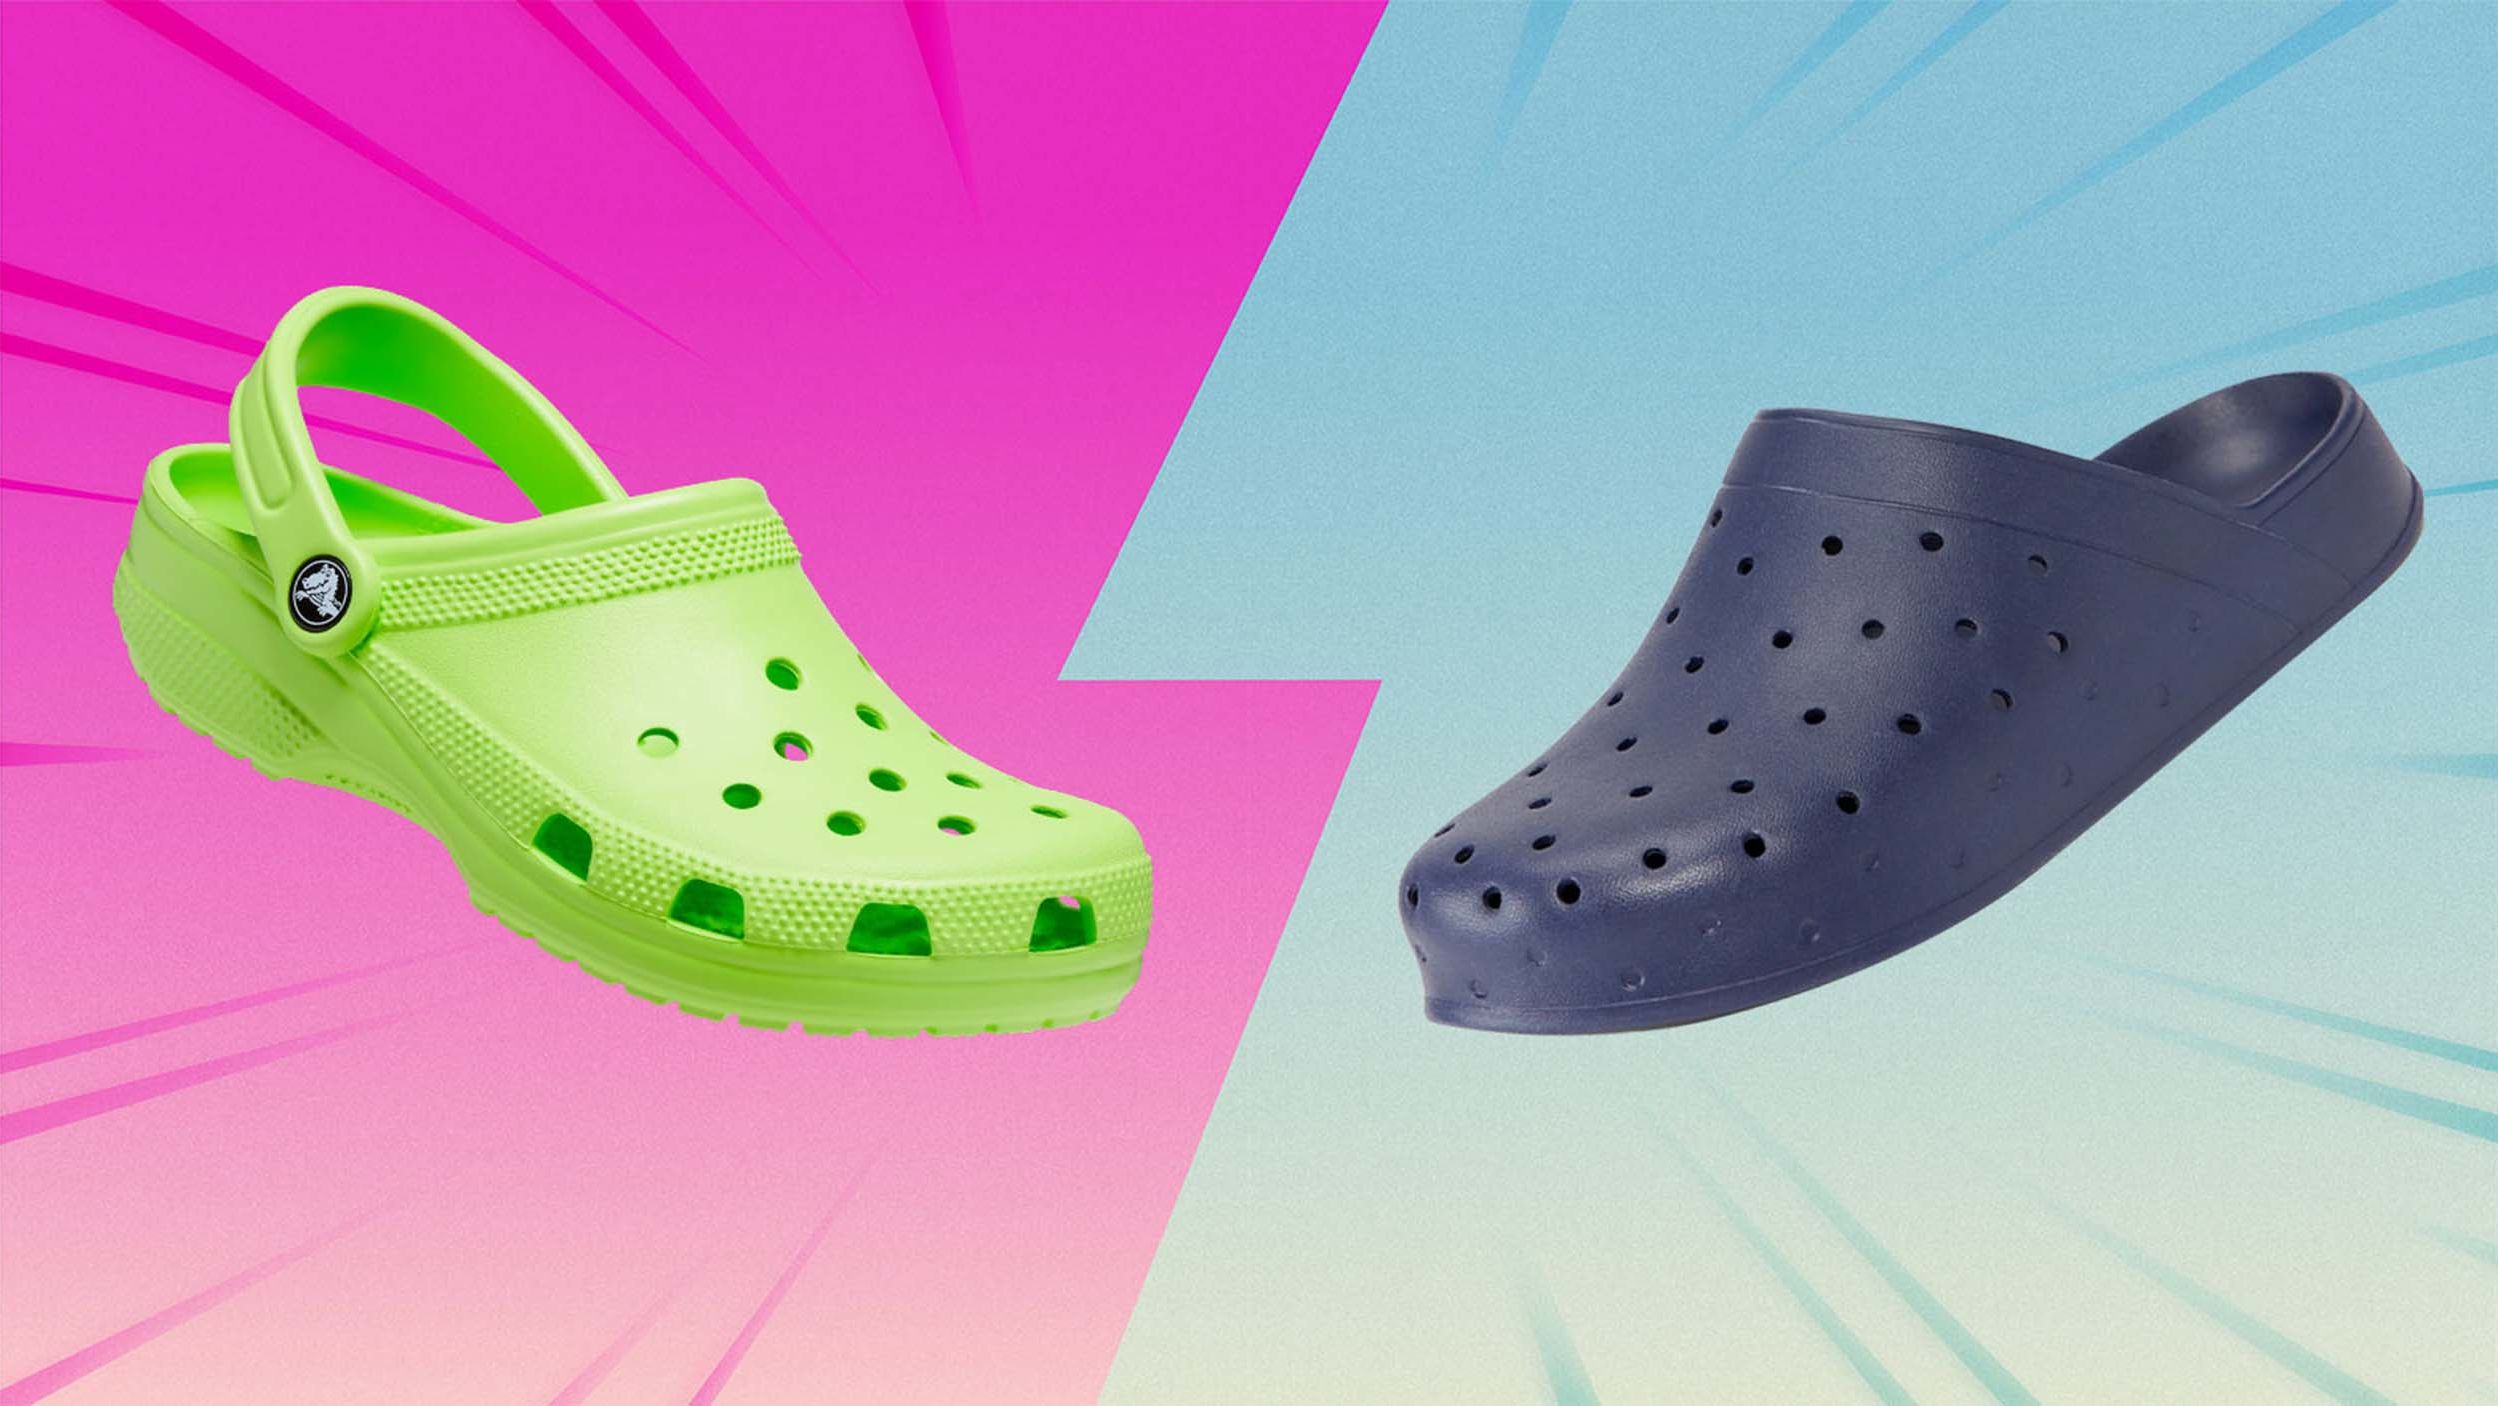 Crocs vs Old Navy clogs: We put these shoes to the test